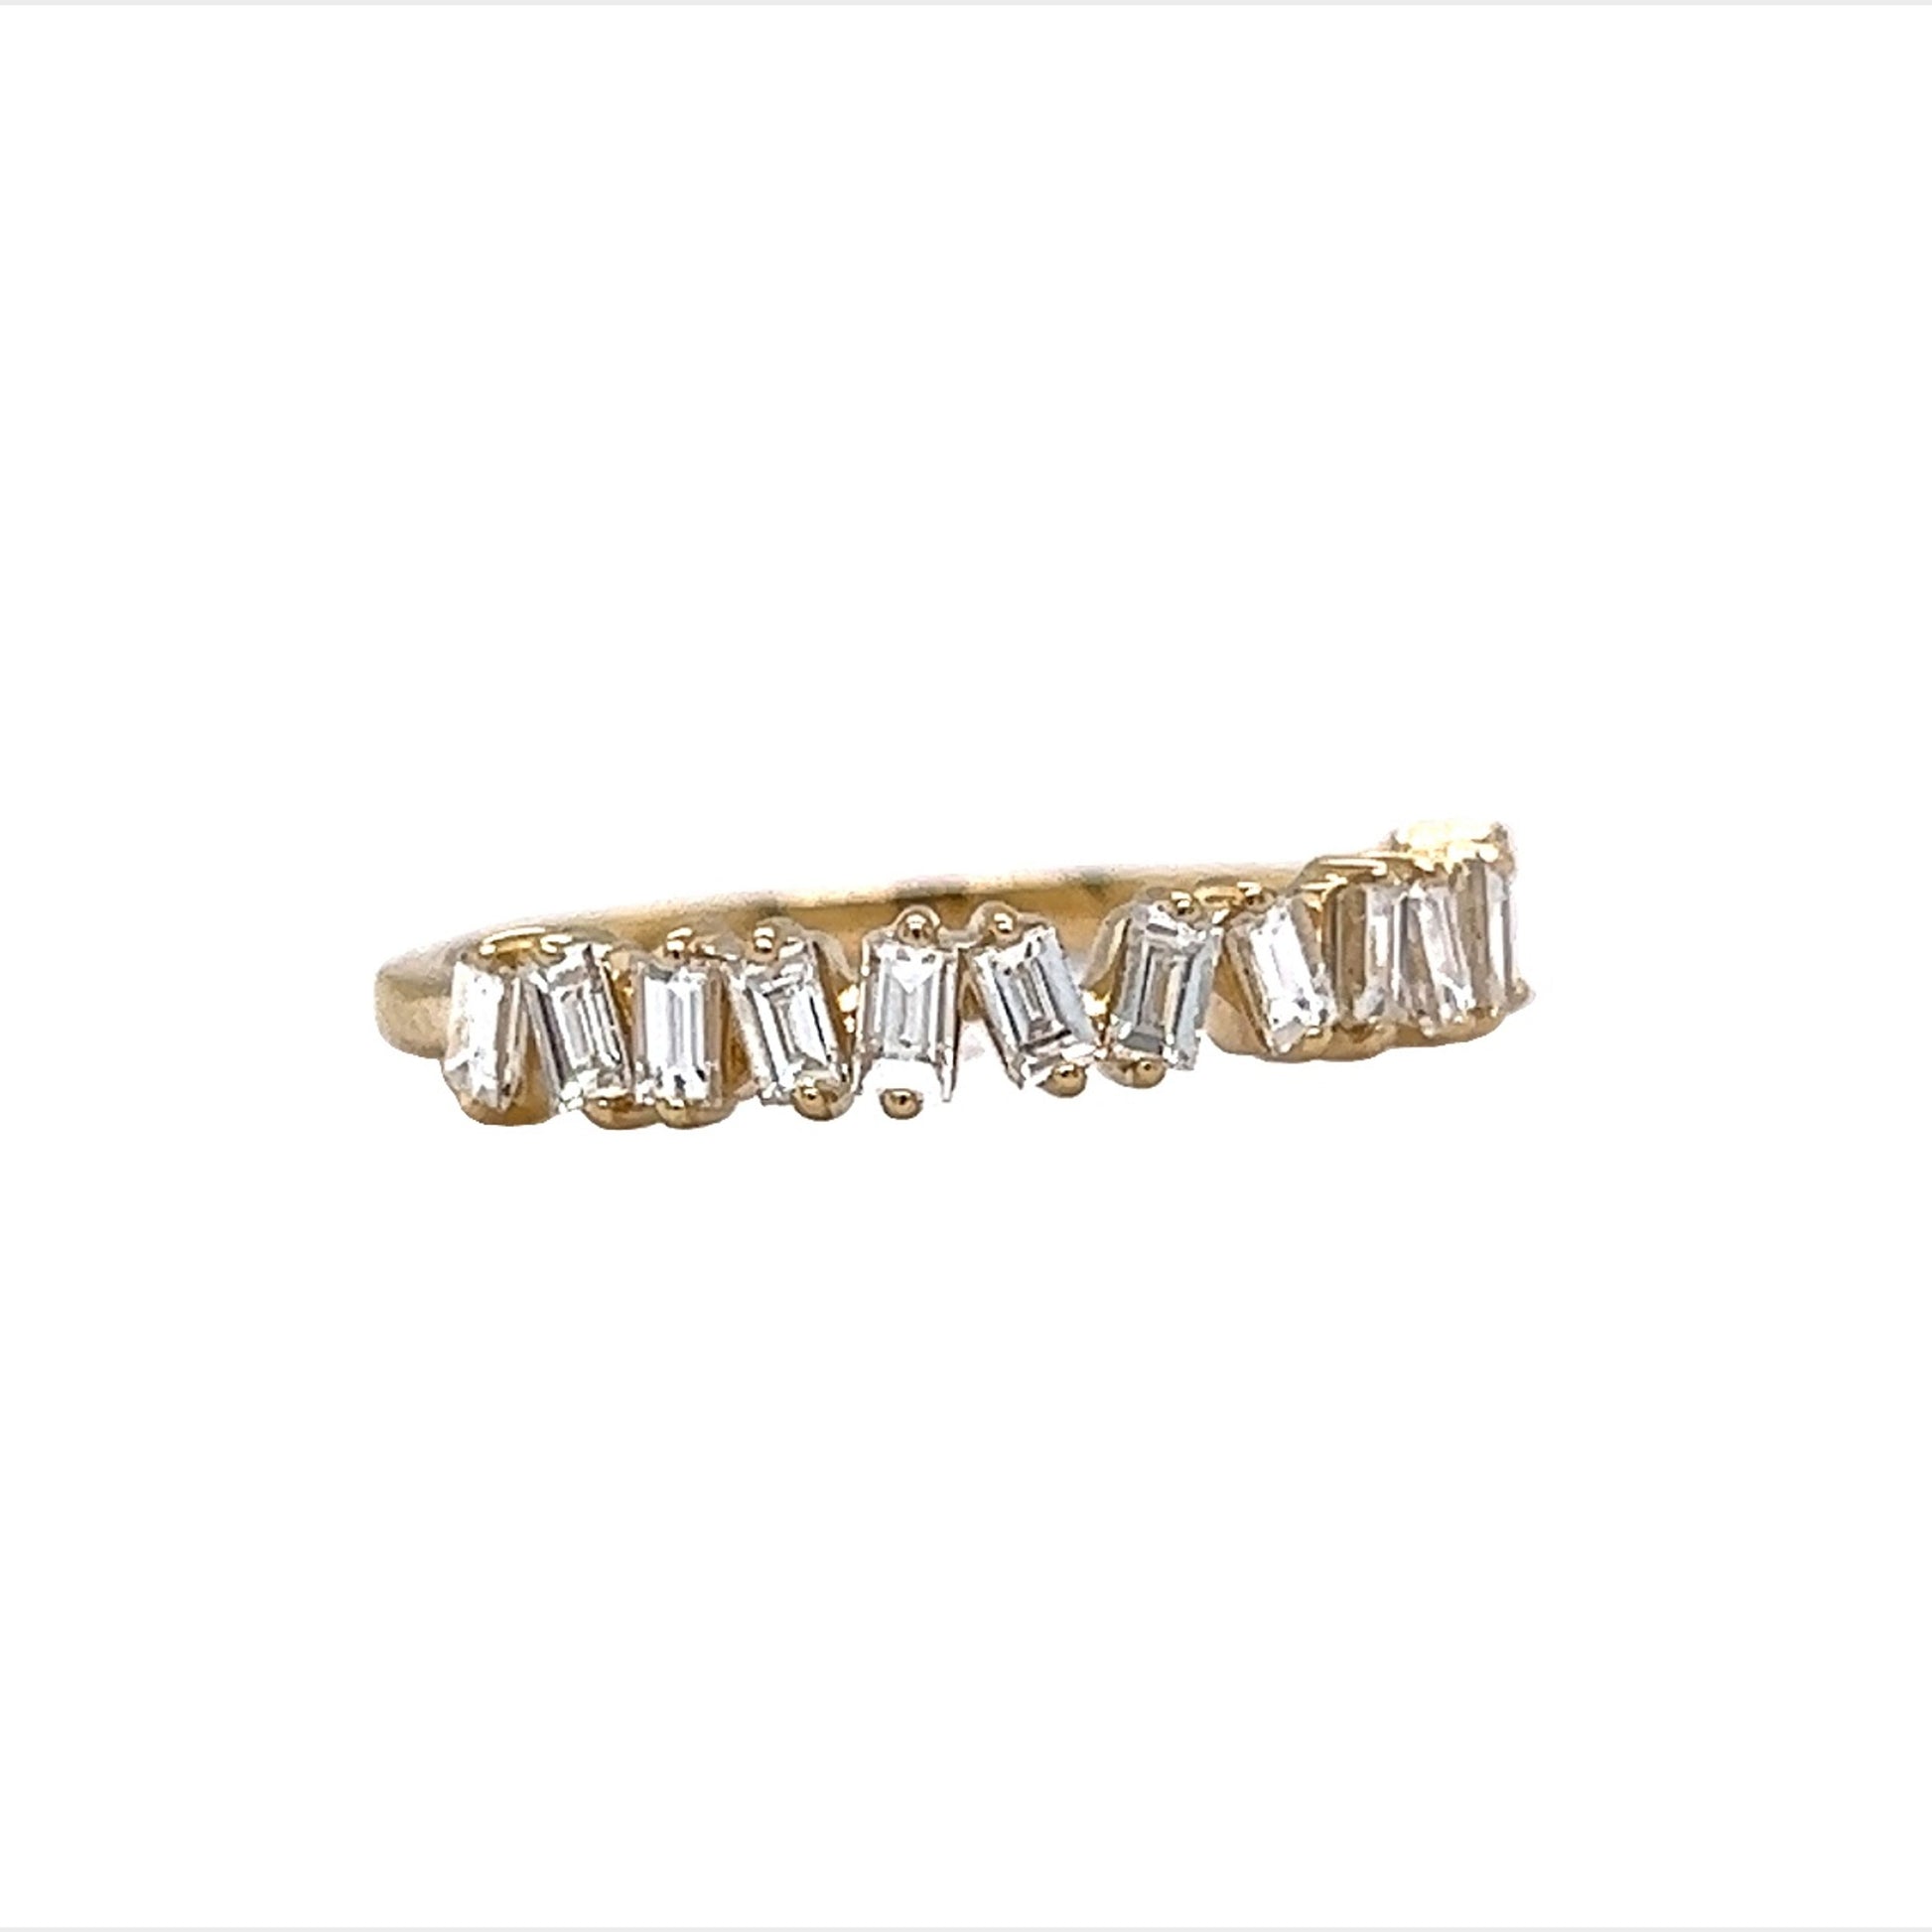 Staggered Baguette Cut Diamond Wedding Band in 14k Yellow Gold